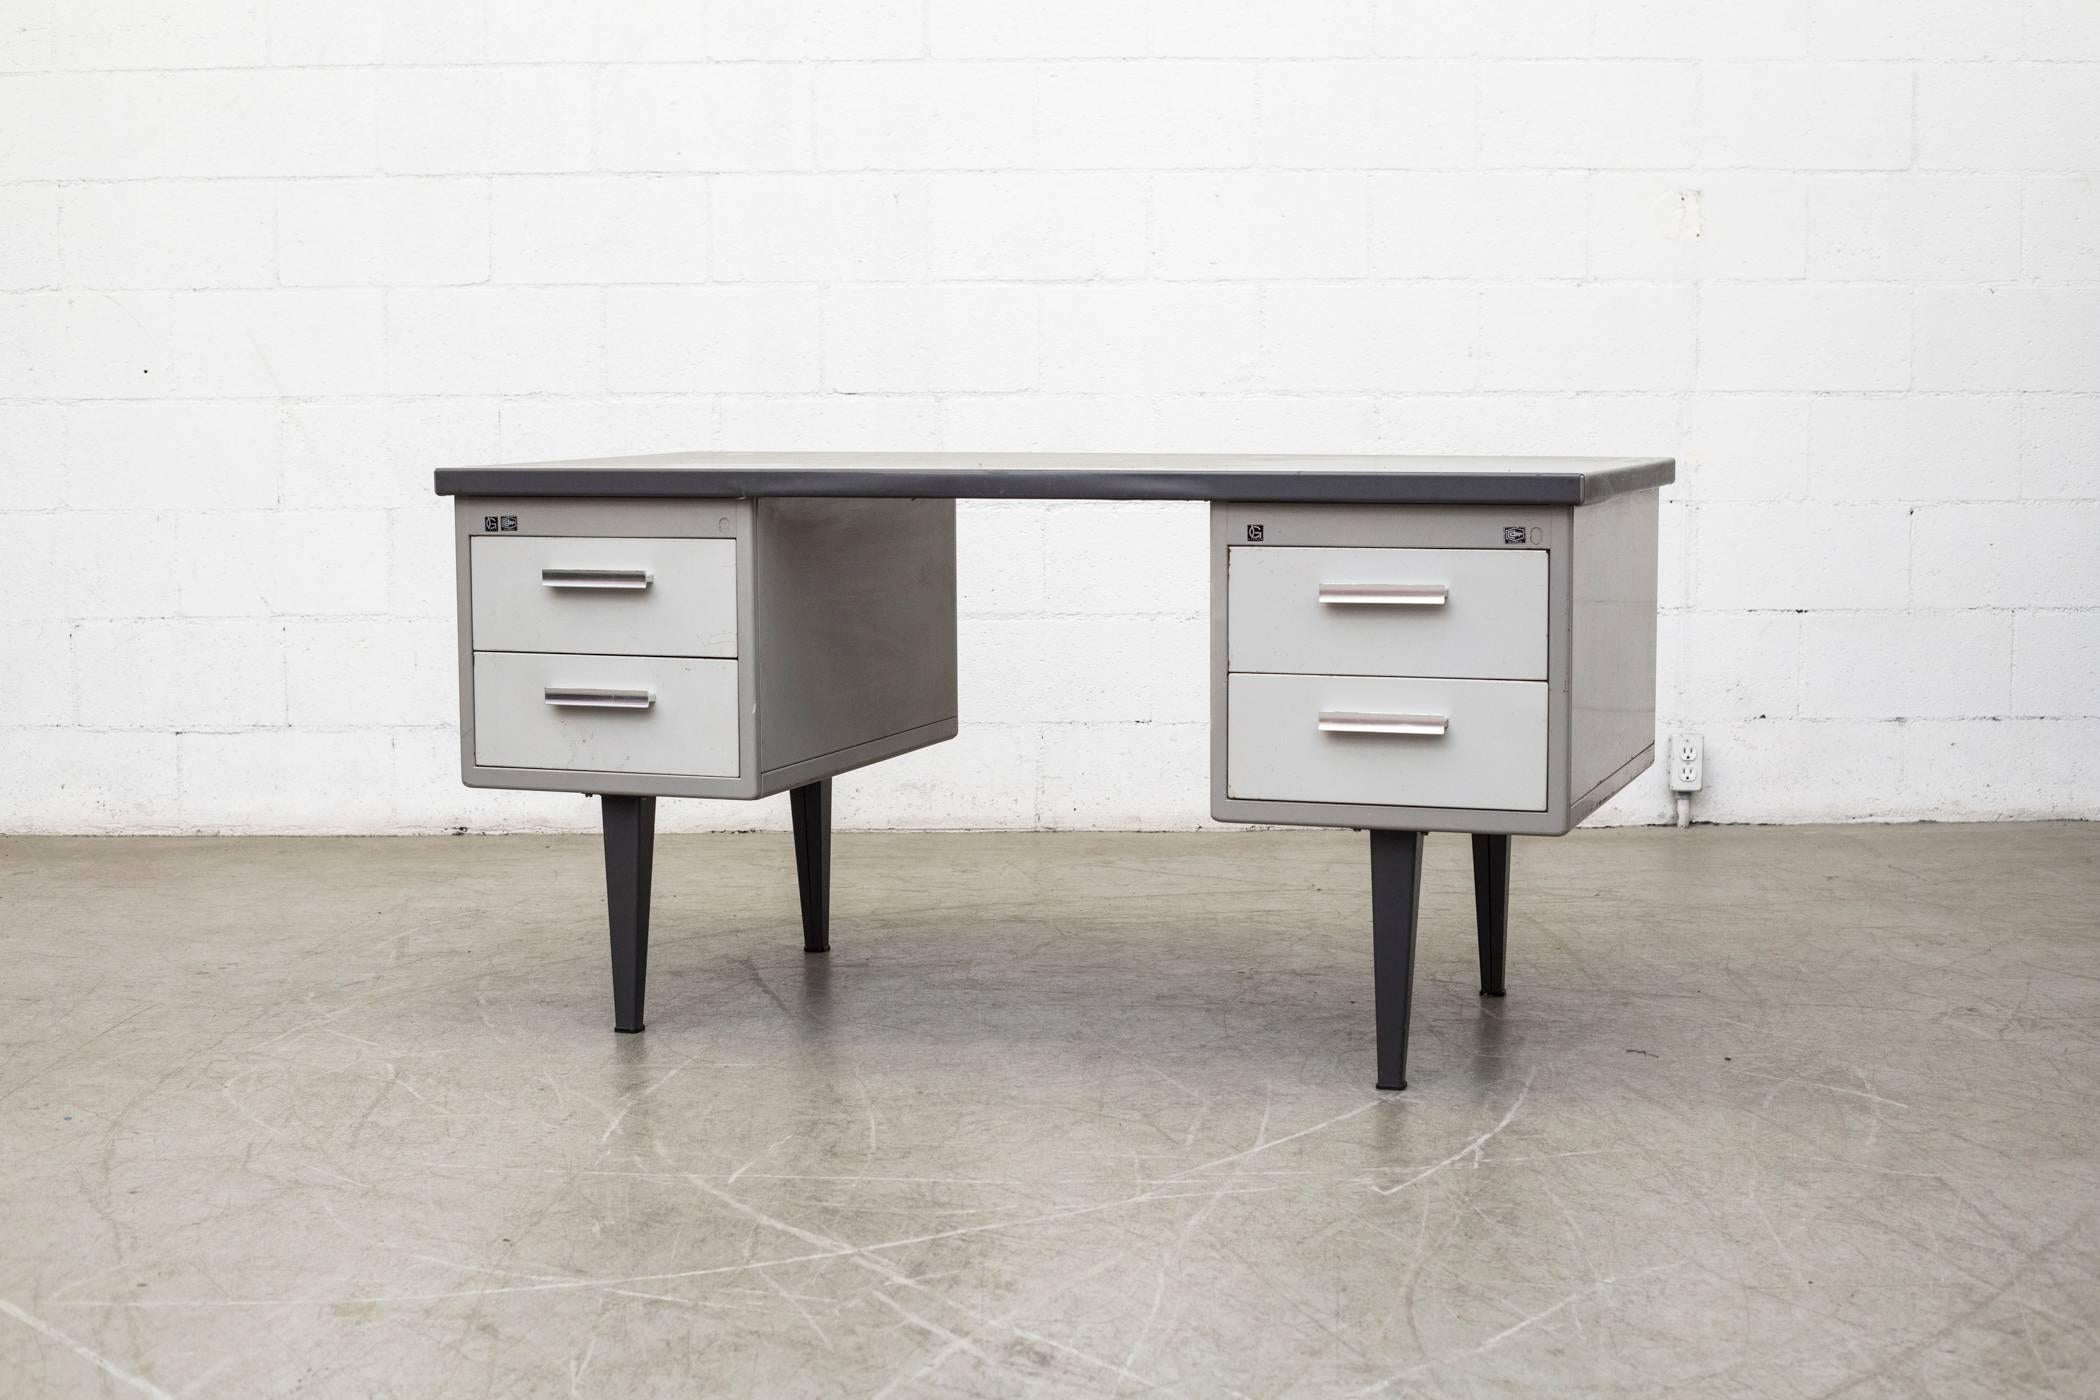 Industrial Mid-Century Grey Enameled Metal Gispen Desk with Bone White Drawers and Black Enameled Metal Feet and Linoleum Wrapped Top in Good Original Condition with Visible Wear Consistent with its age and usage. No Keys included.